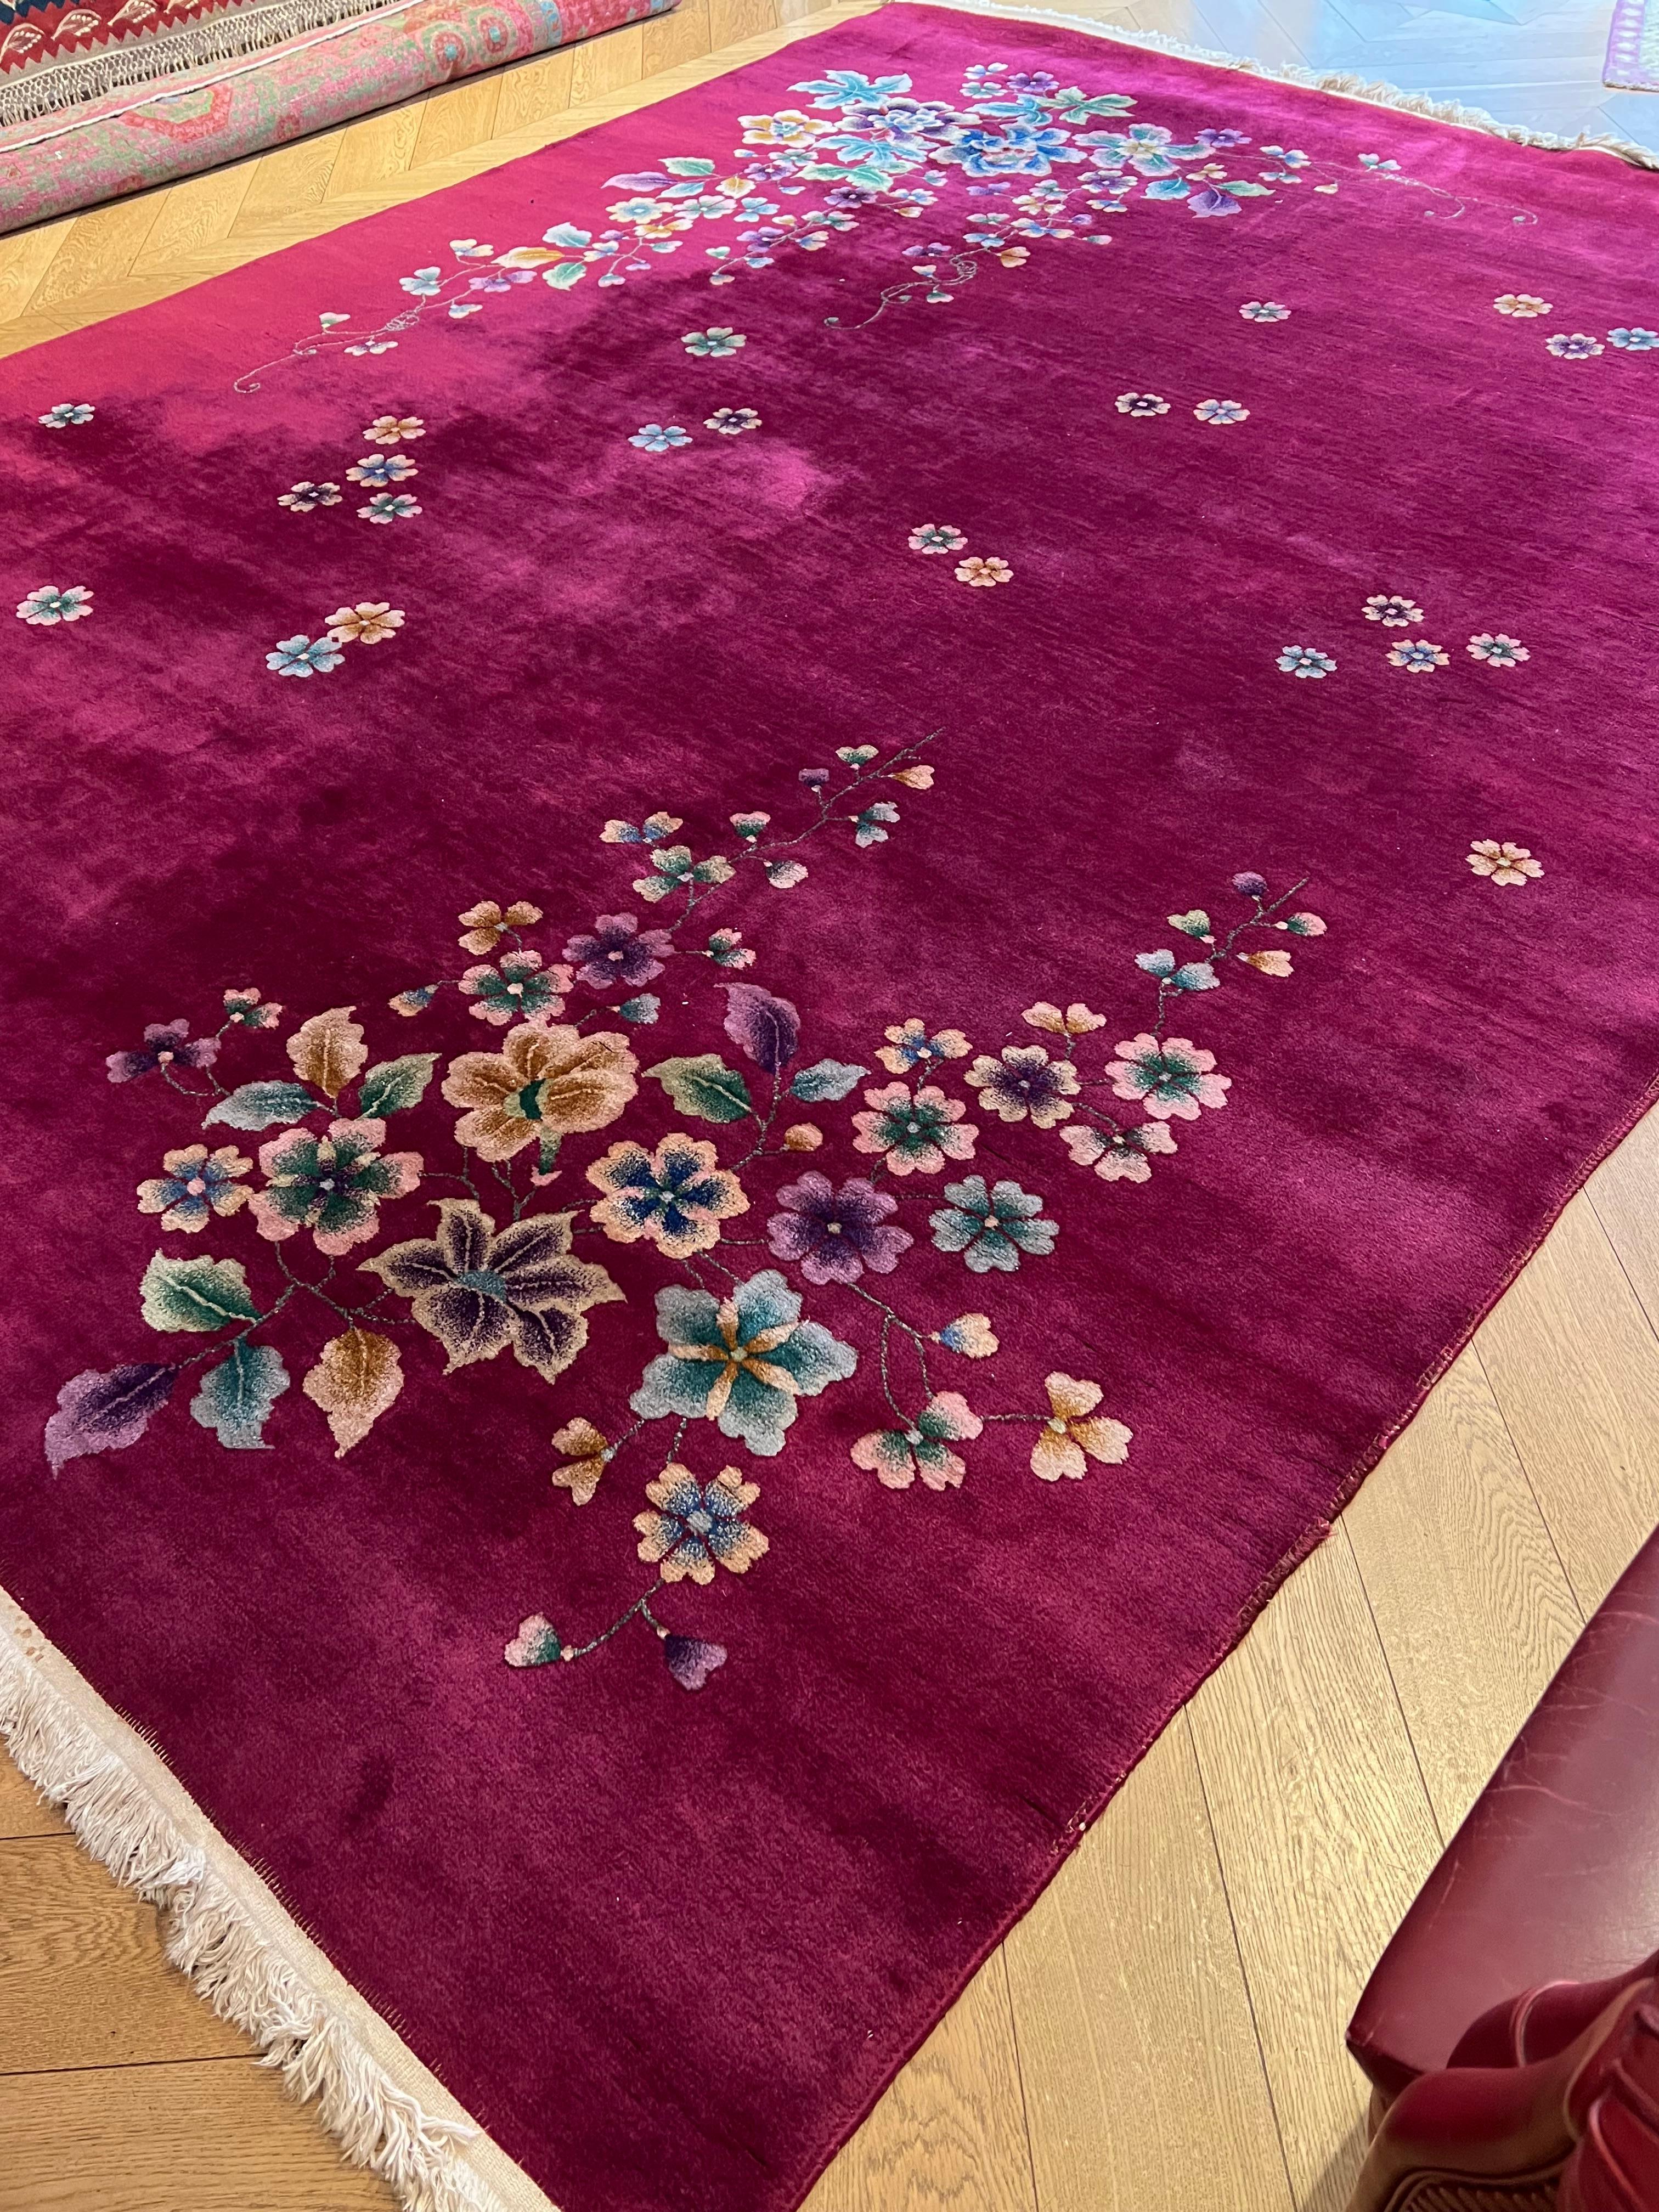 From the elegance and unusual style you can recognize this beautiful Chinese carpet from the Art Deco period. The wool is bright and silky, spun with greater thickness than normal Chinese wool. This type of rug was born around the '20s on the